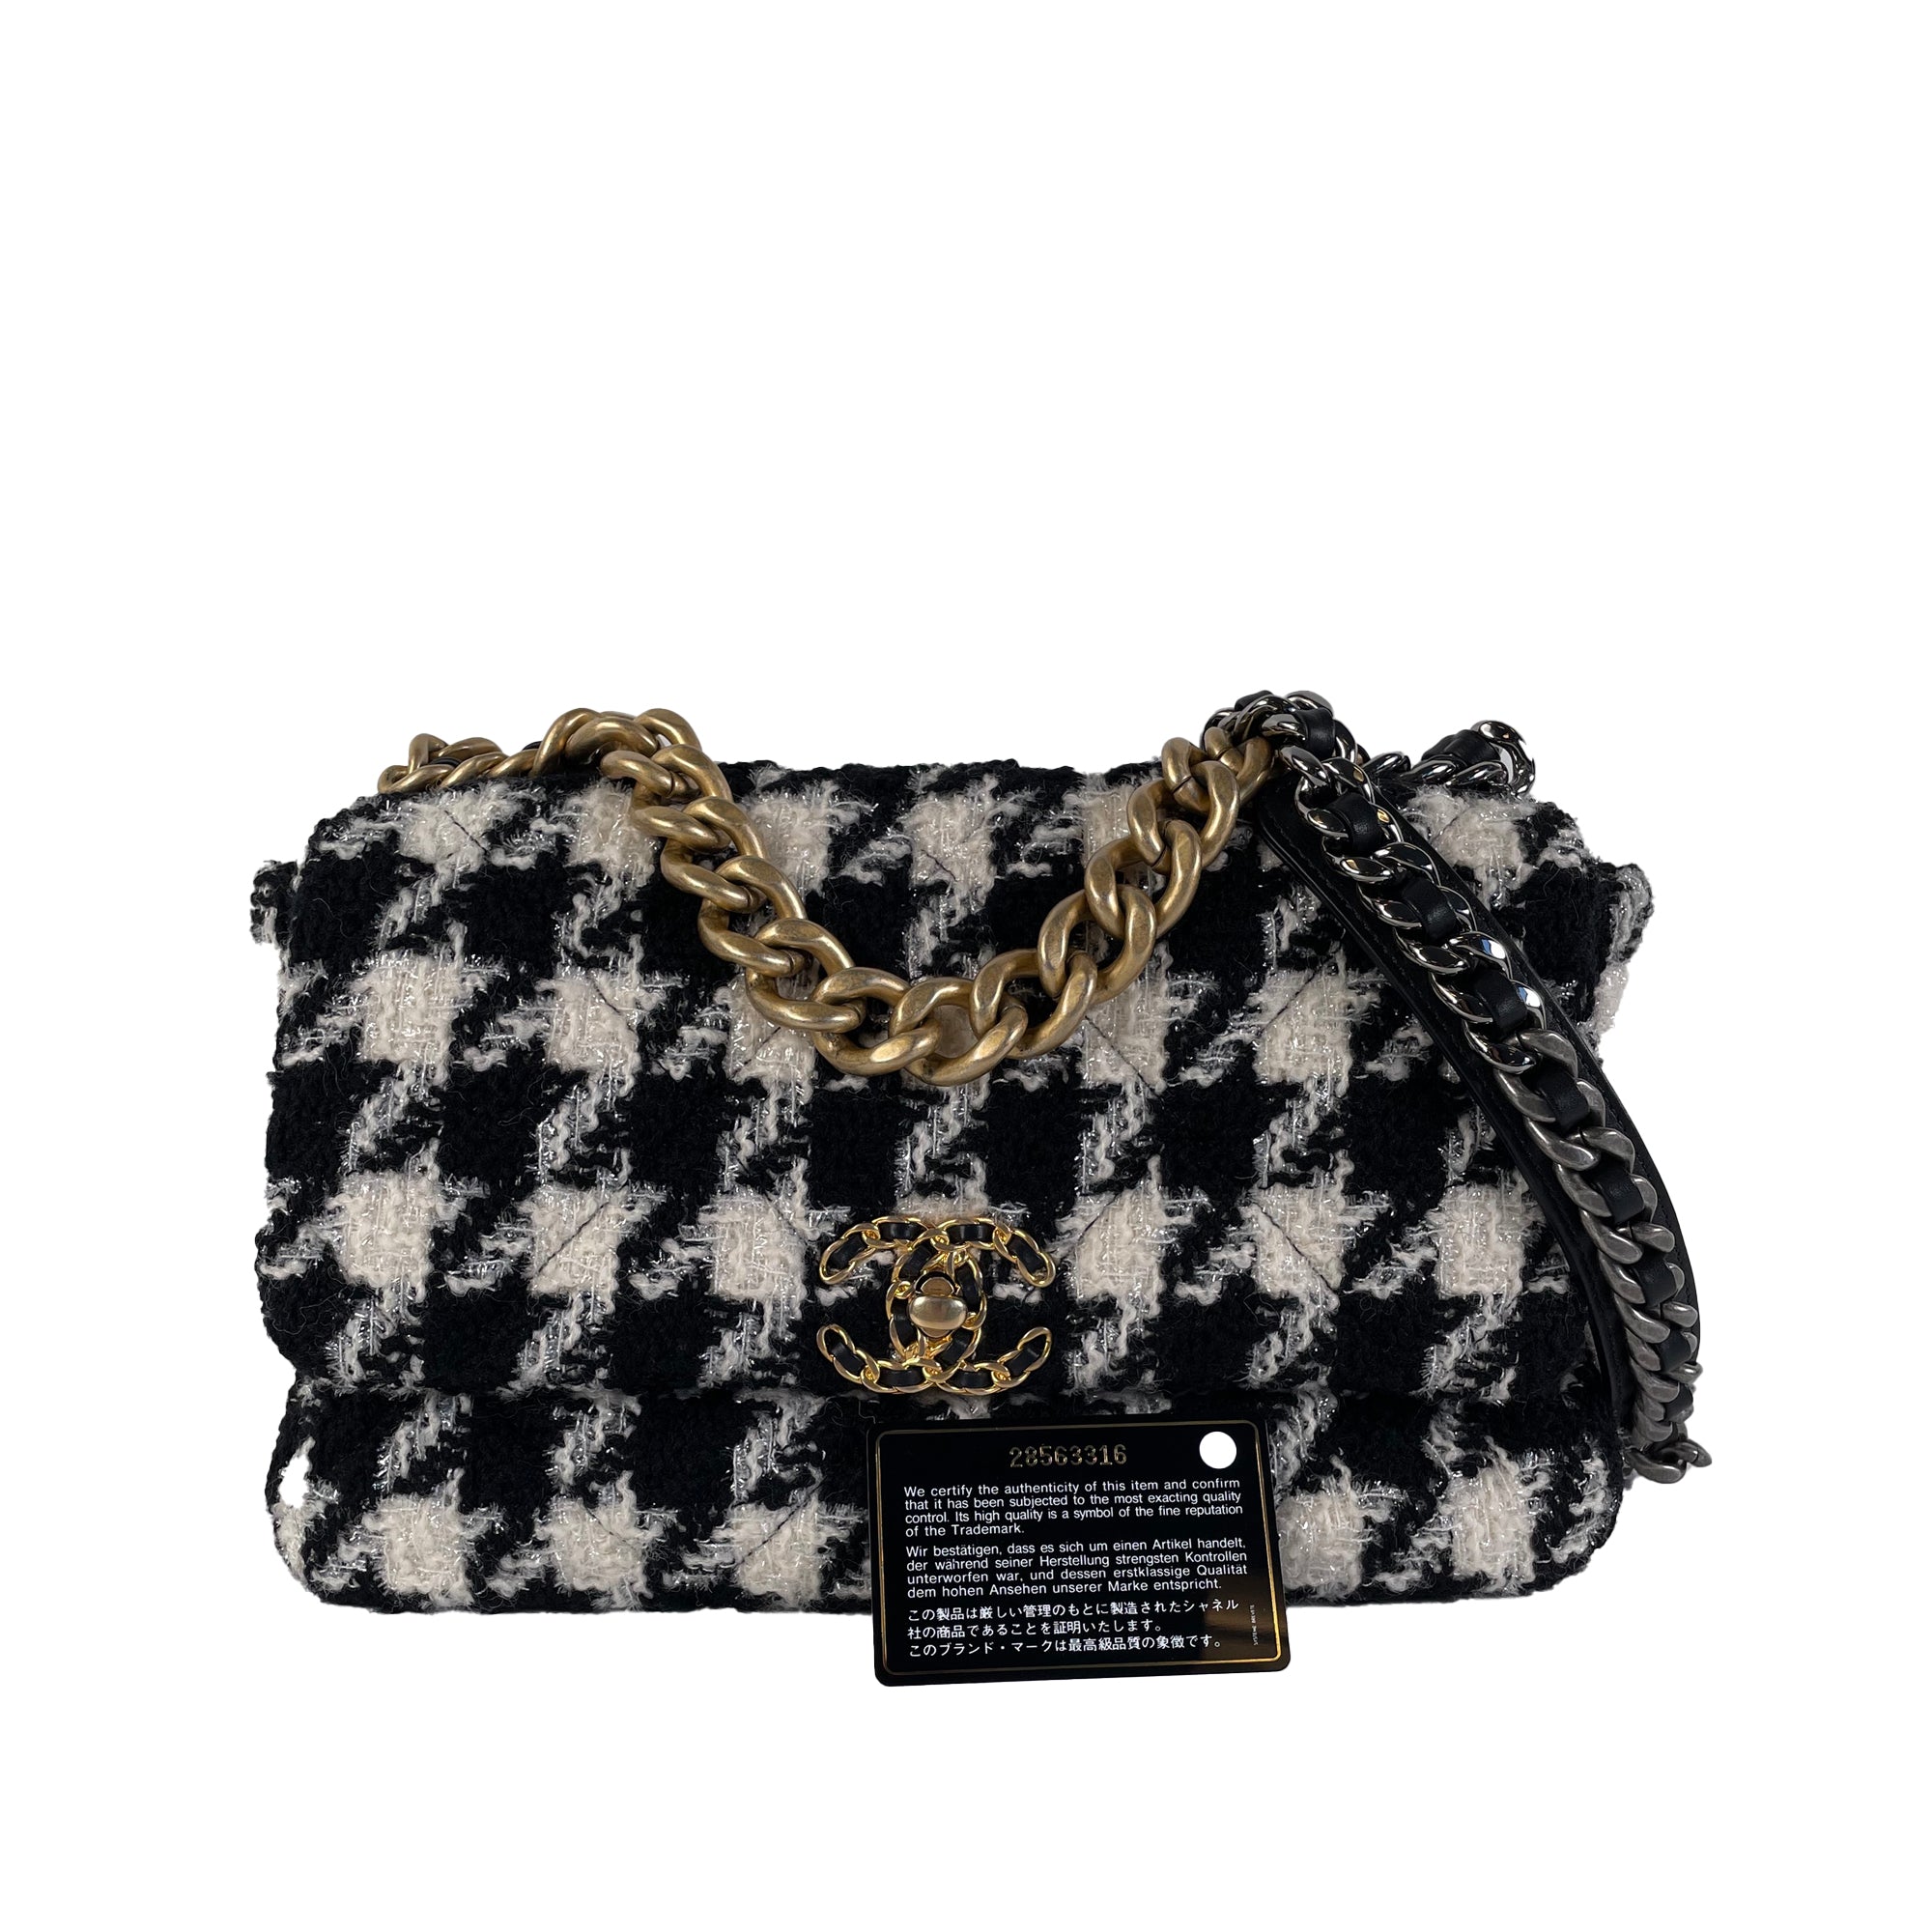 chanel tweed bag black and white